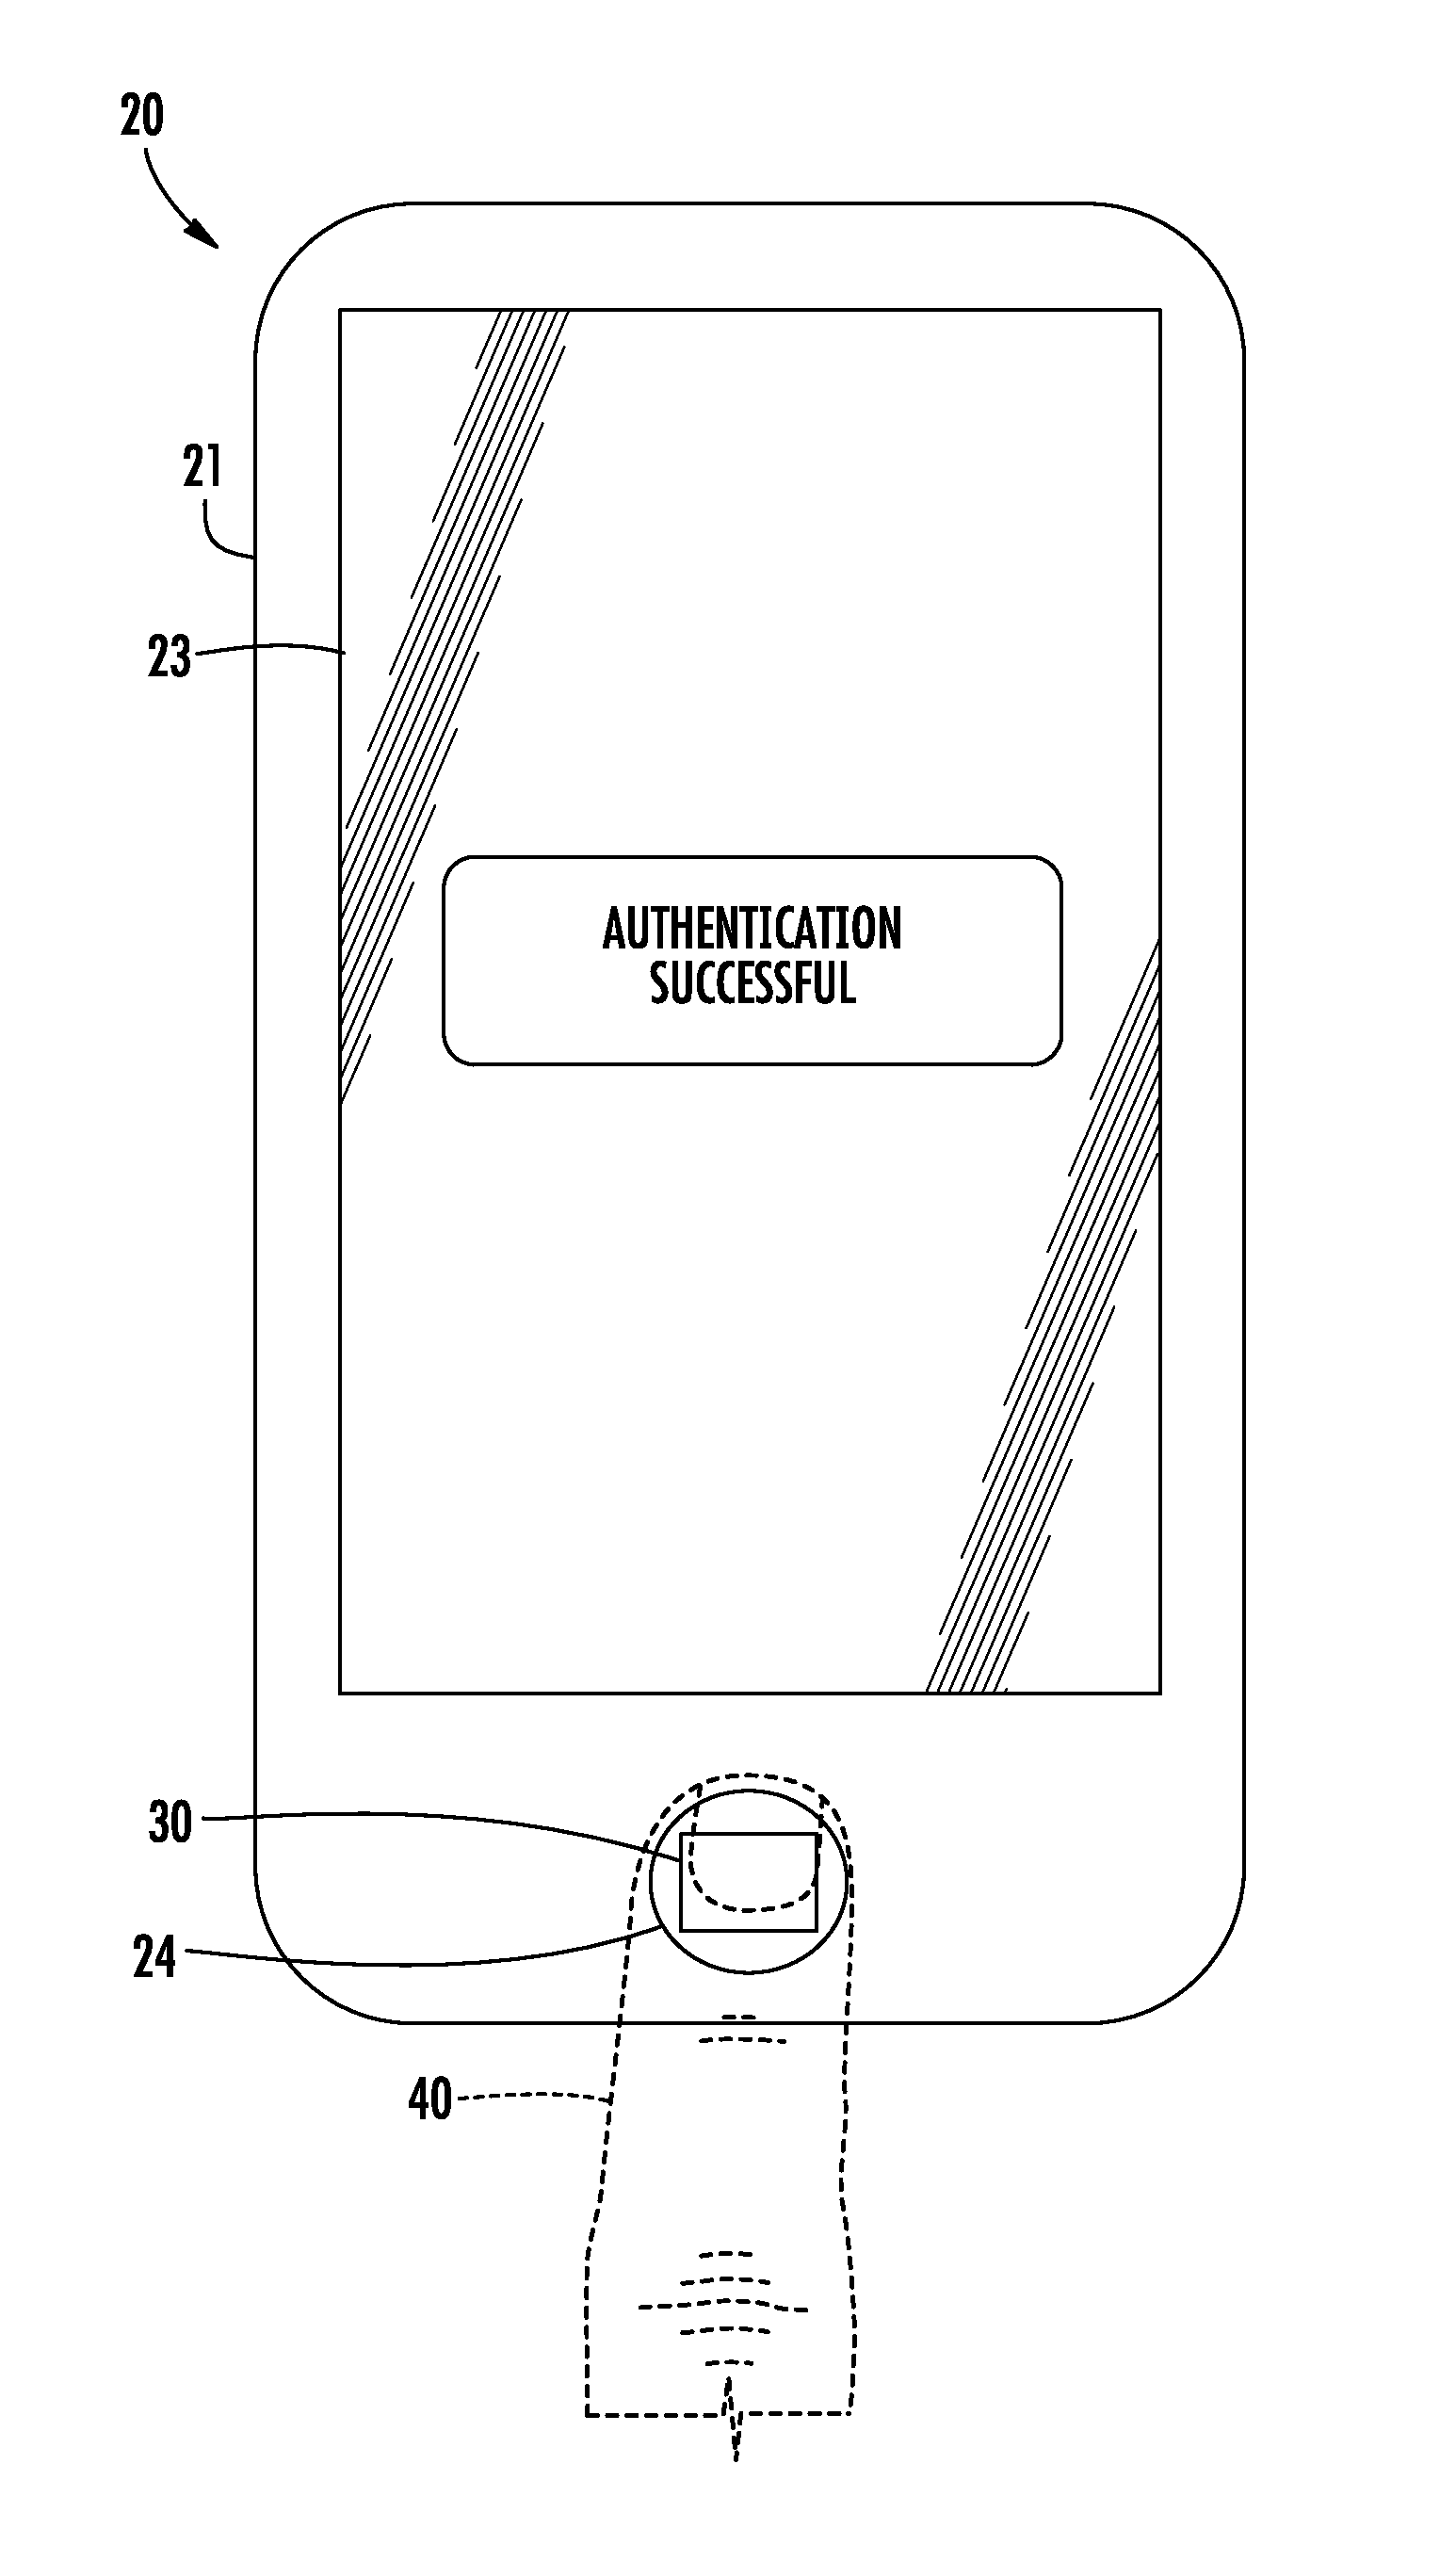 Electronic device performing finger biometric pre-matching and related methods